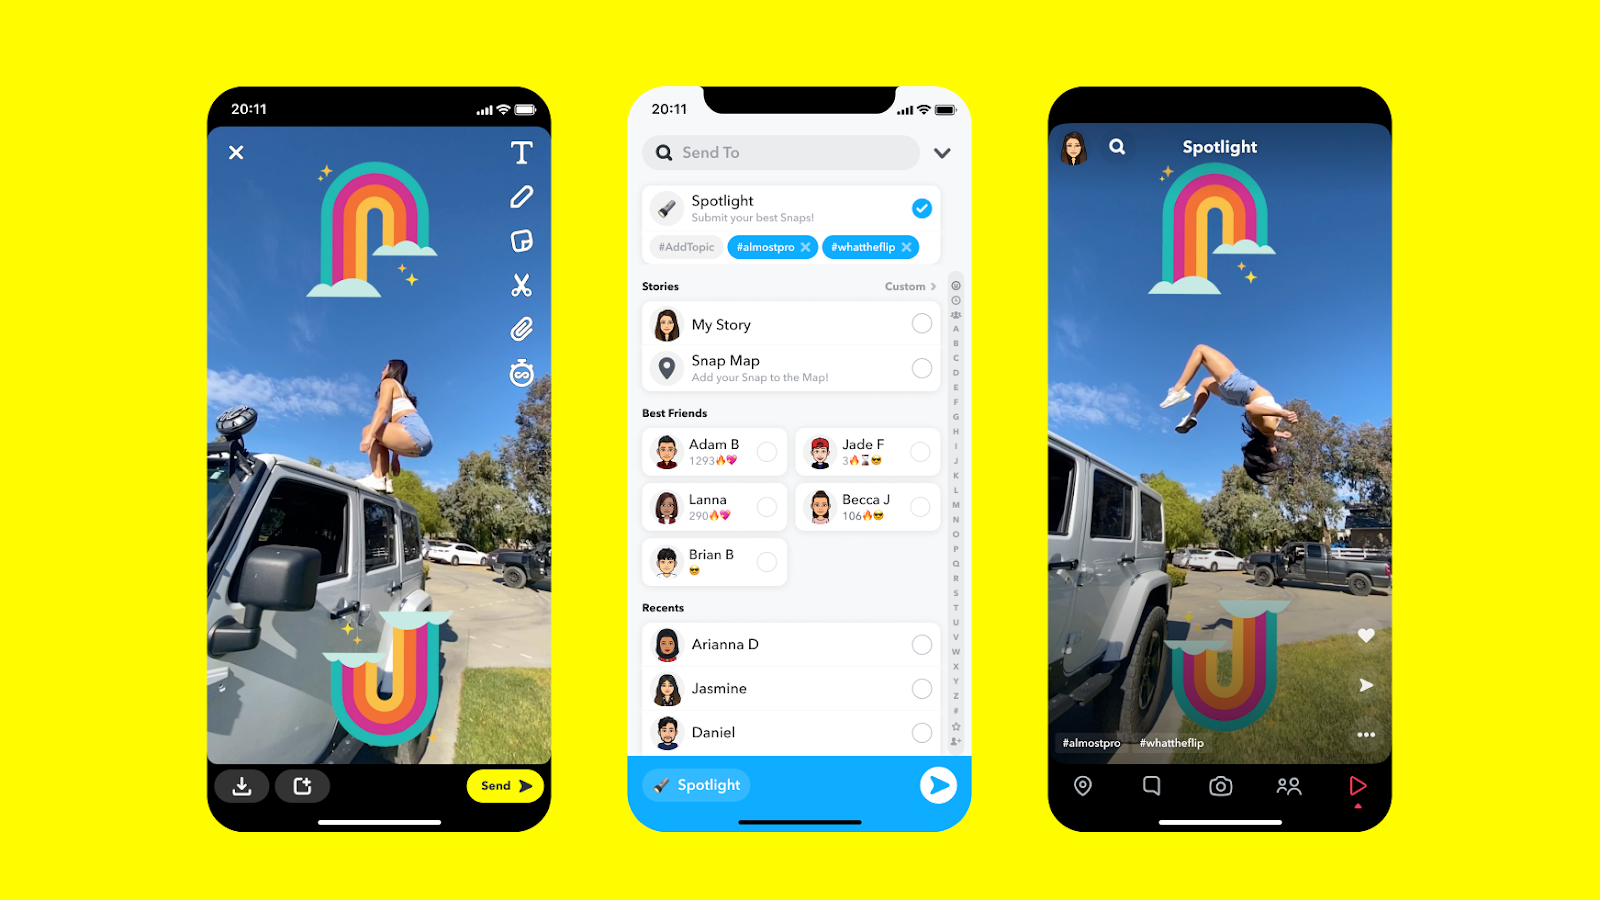 Snapchat: The App to Share Moments, Play Games, and Track People